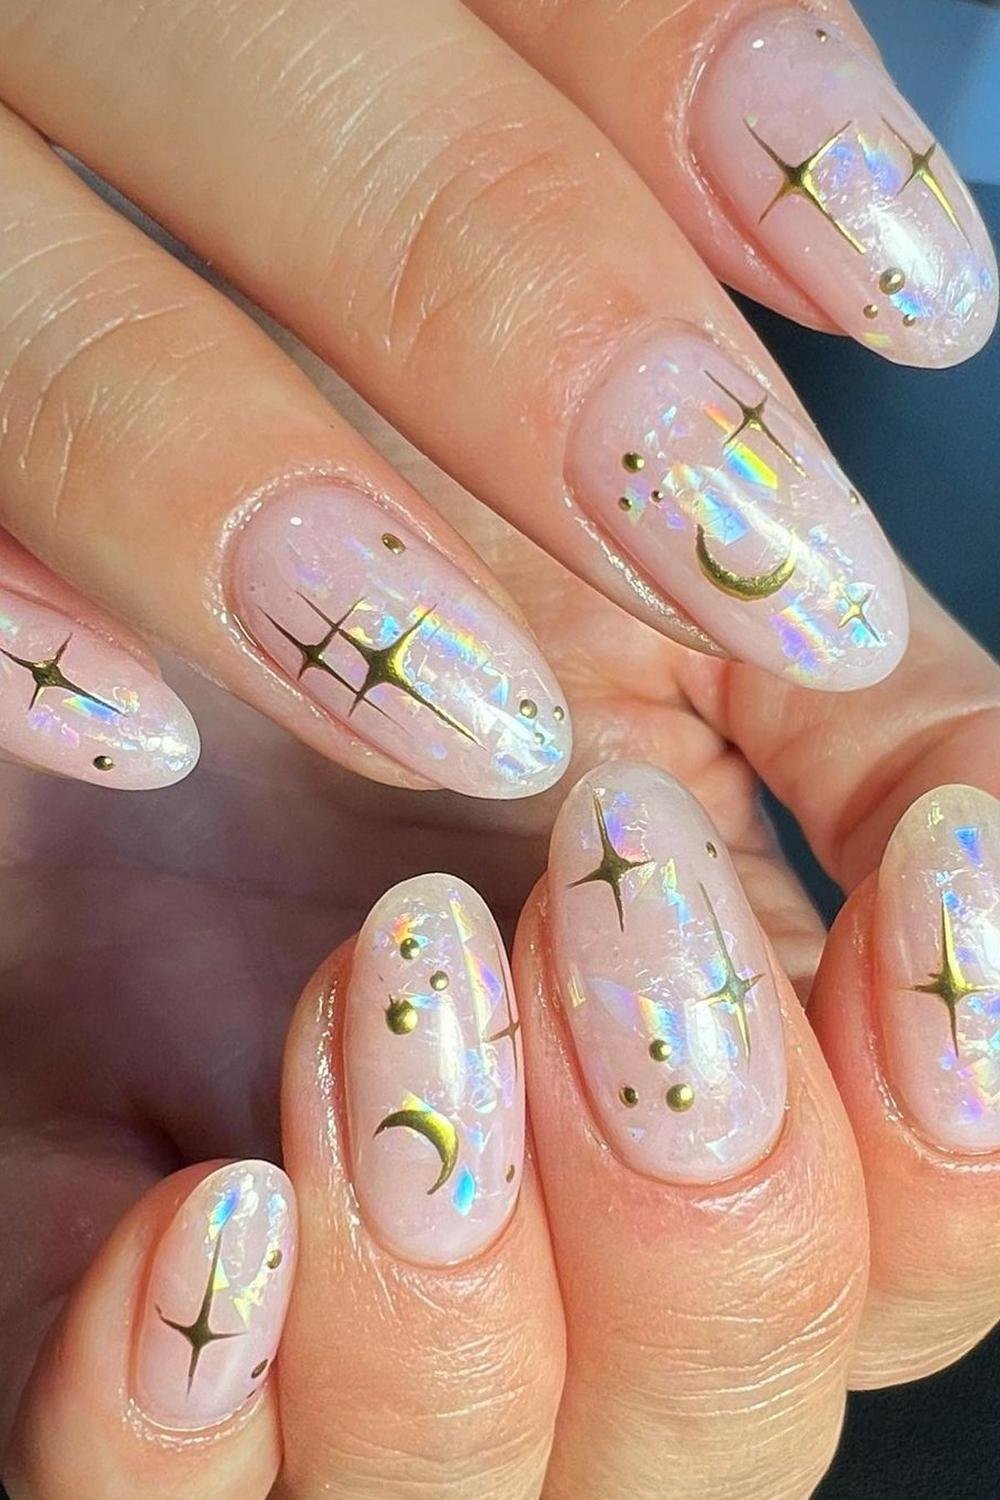 34 - Picture of Whimsical Nails